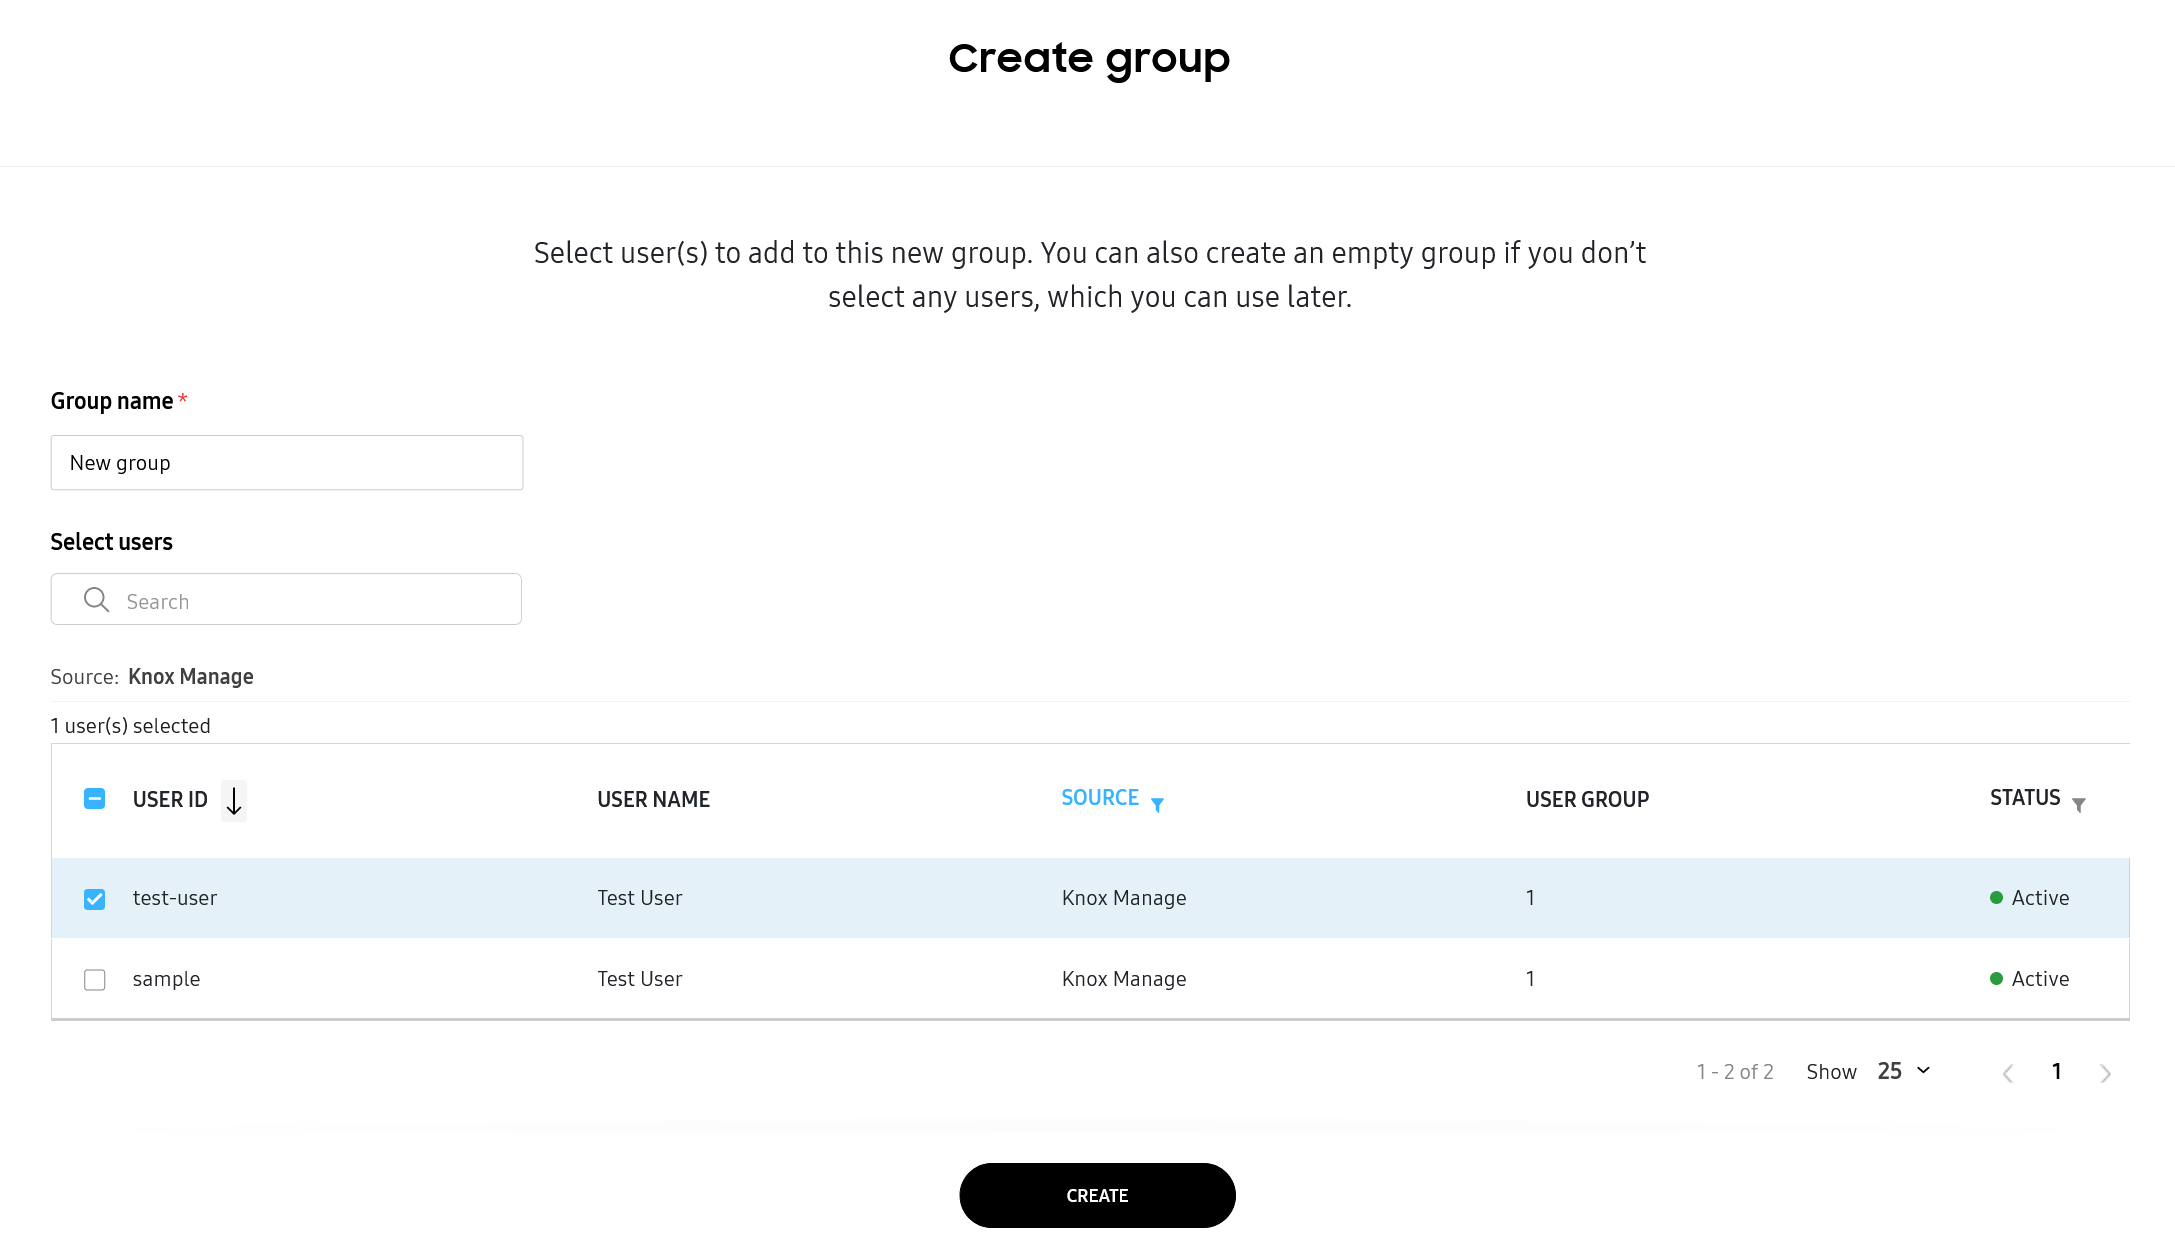 Create group page